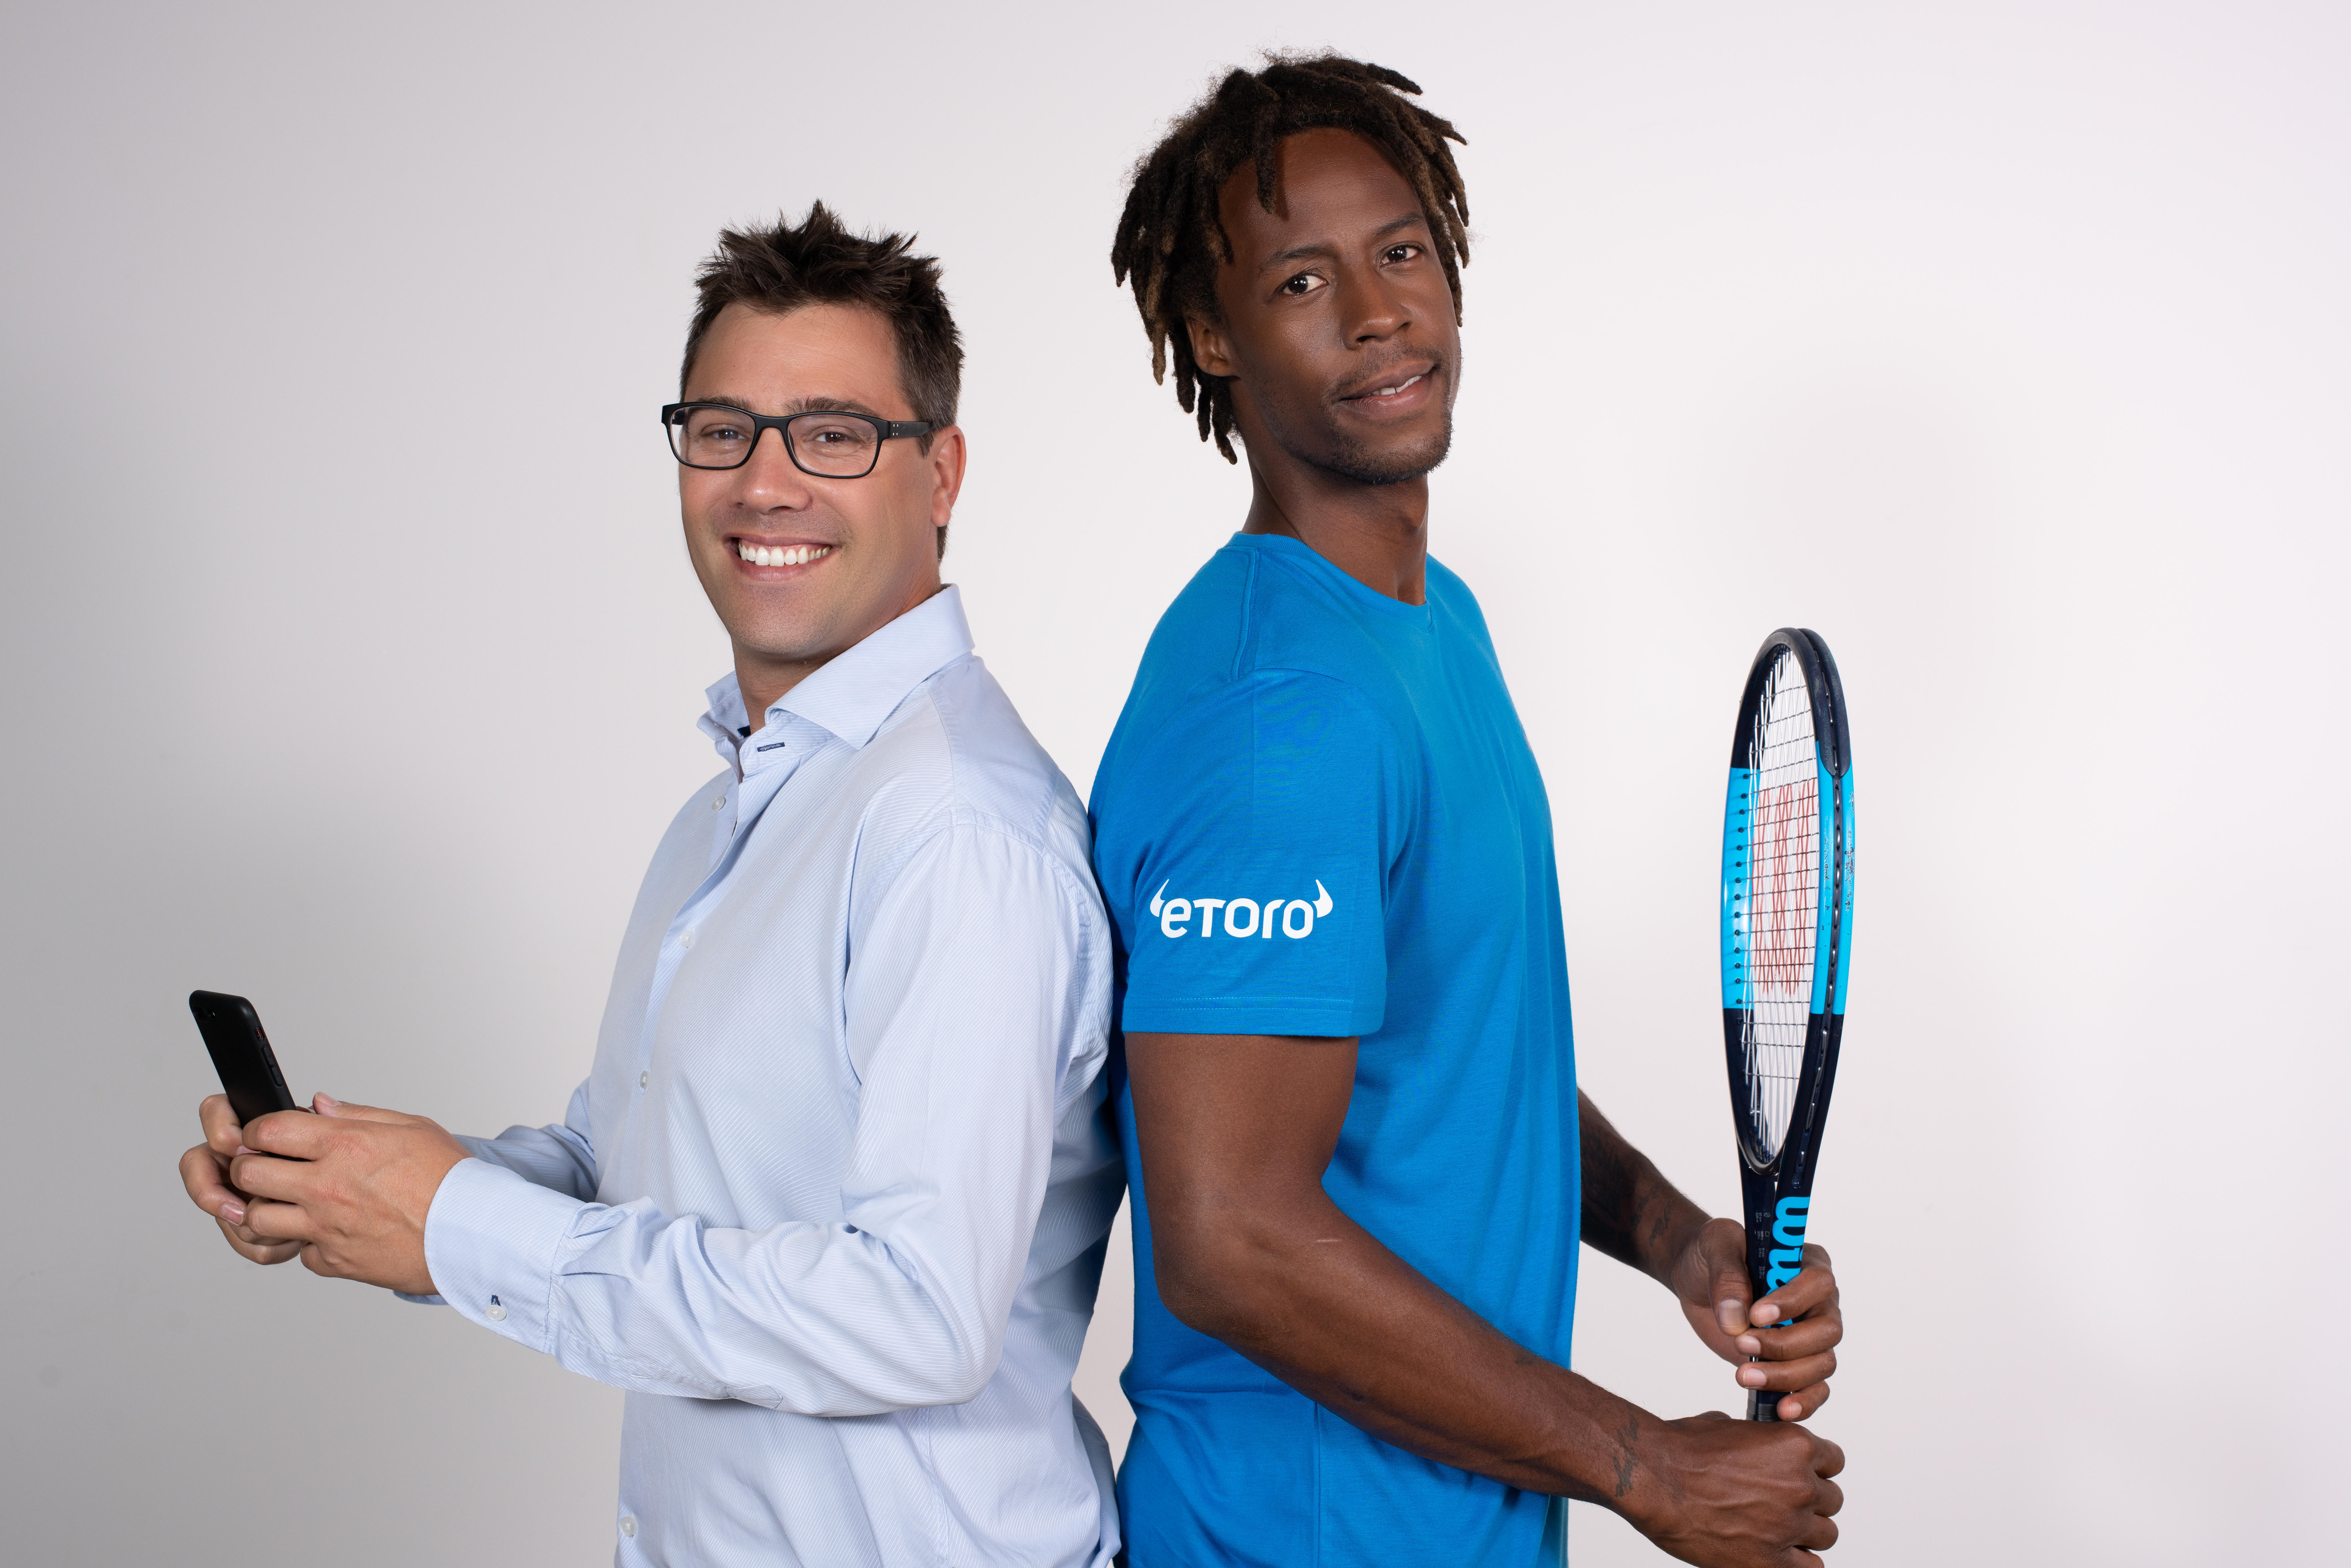 “Get Serious About Investing” with eToro and Gael Monfils ...